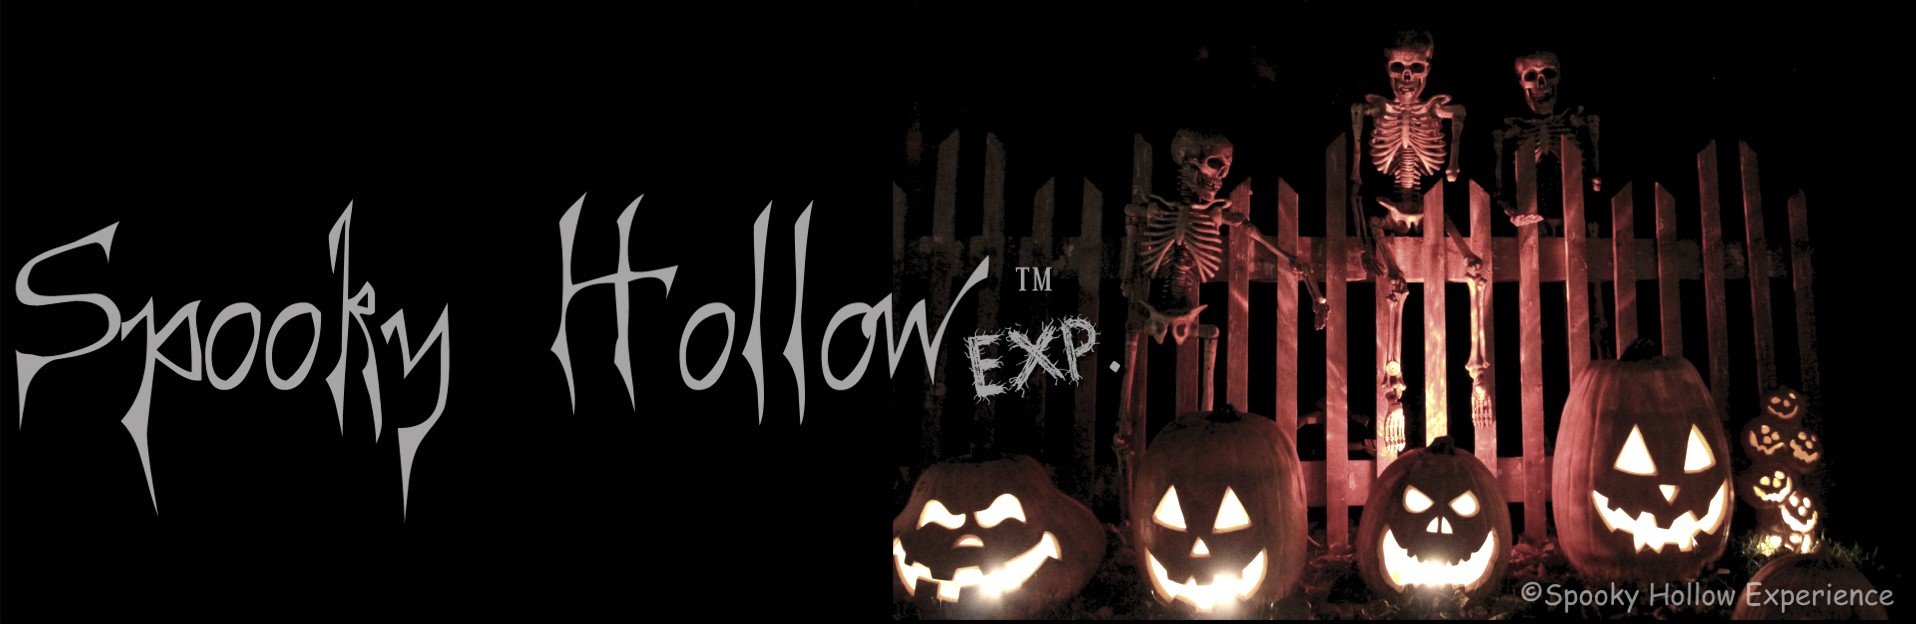 Spooky Hollow Experience official logo